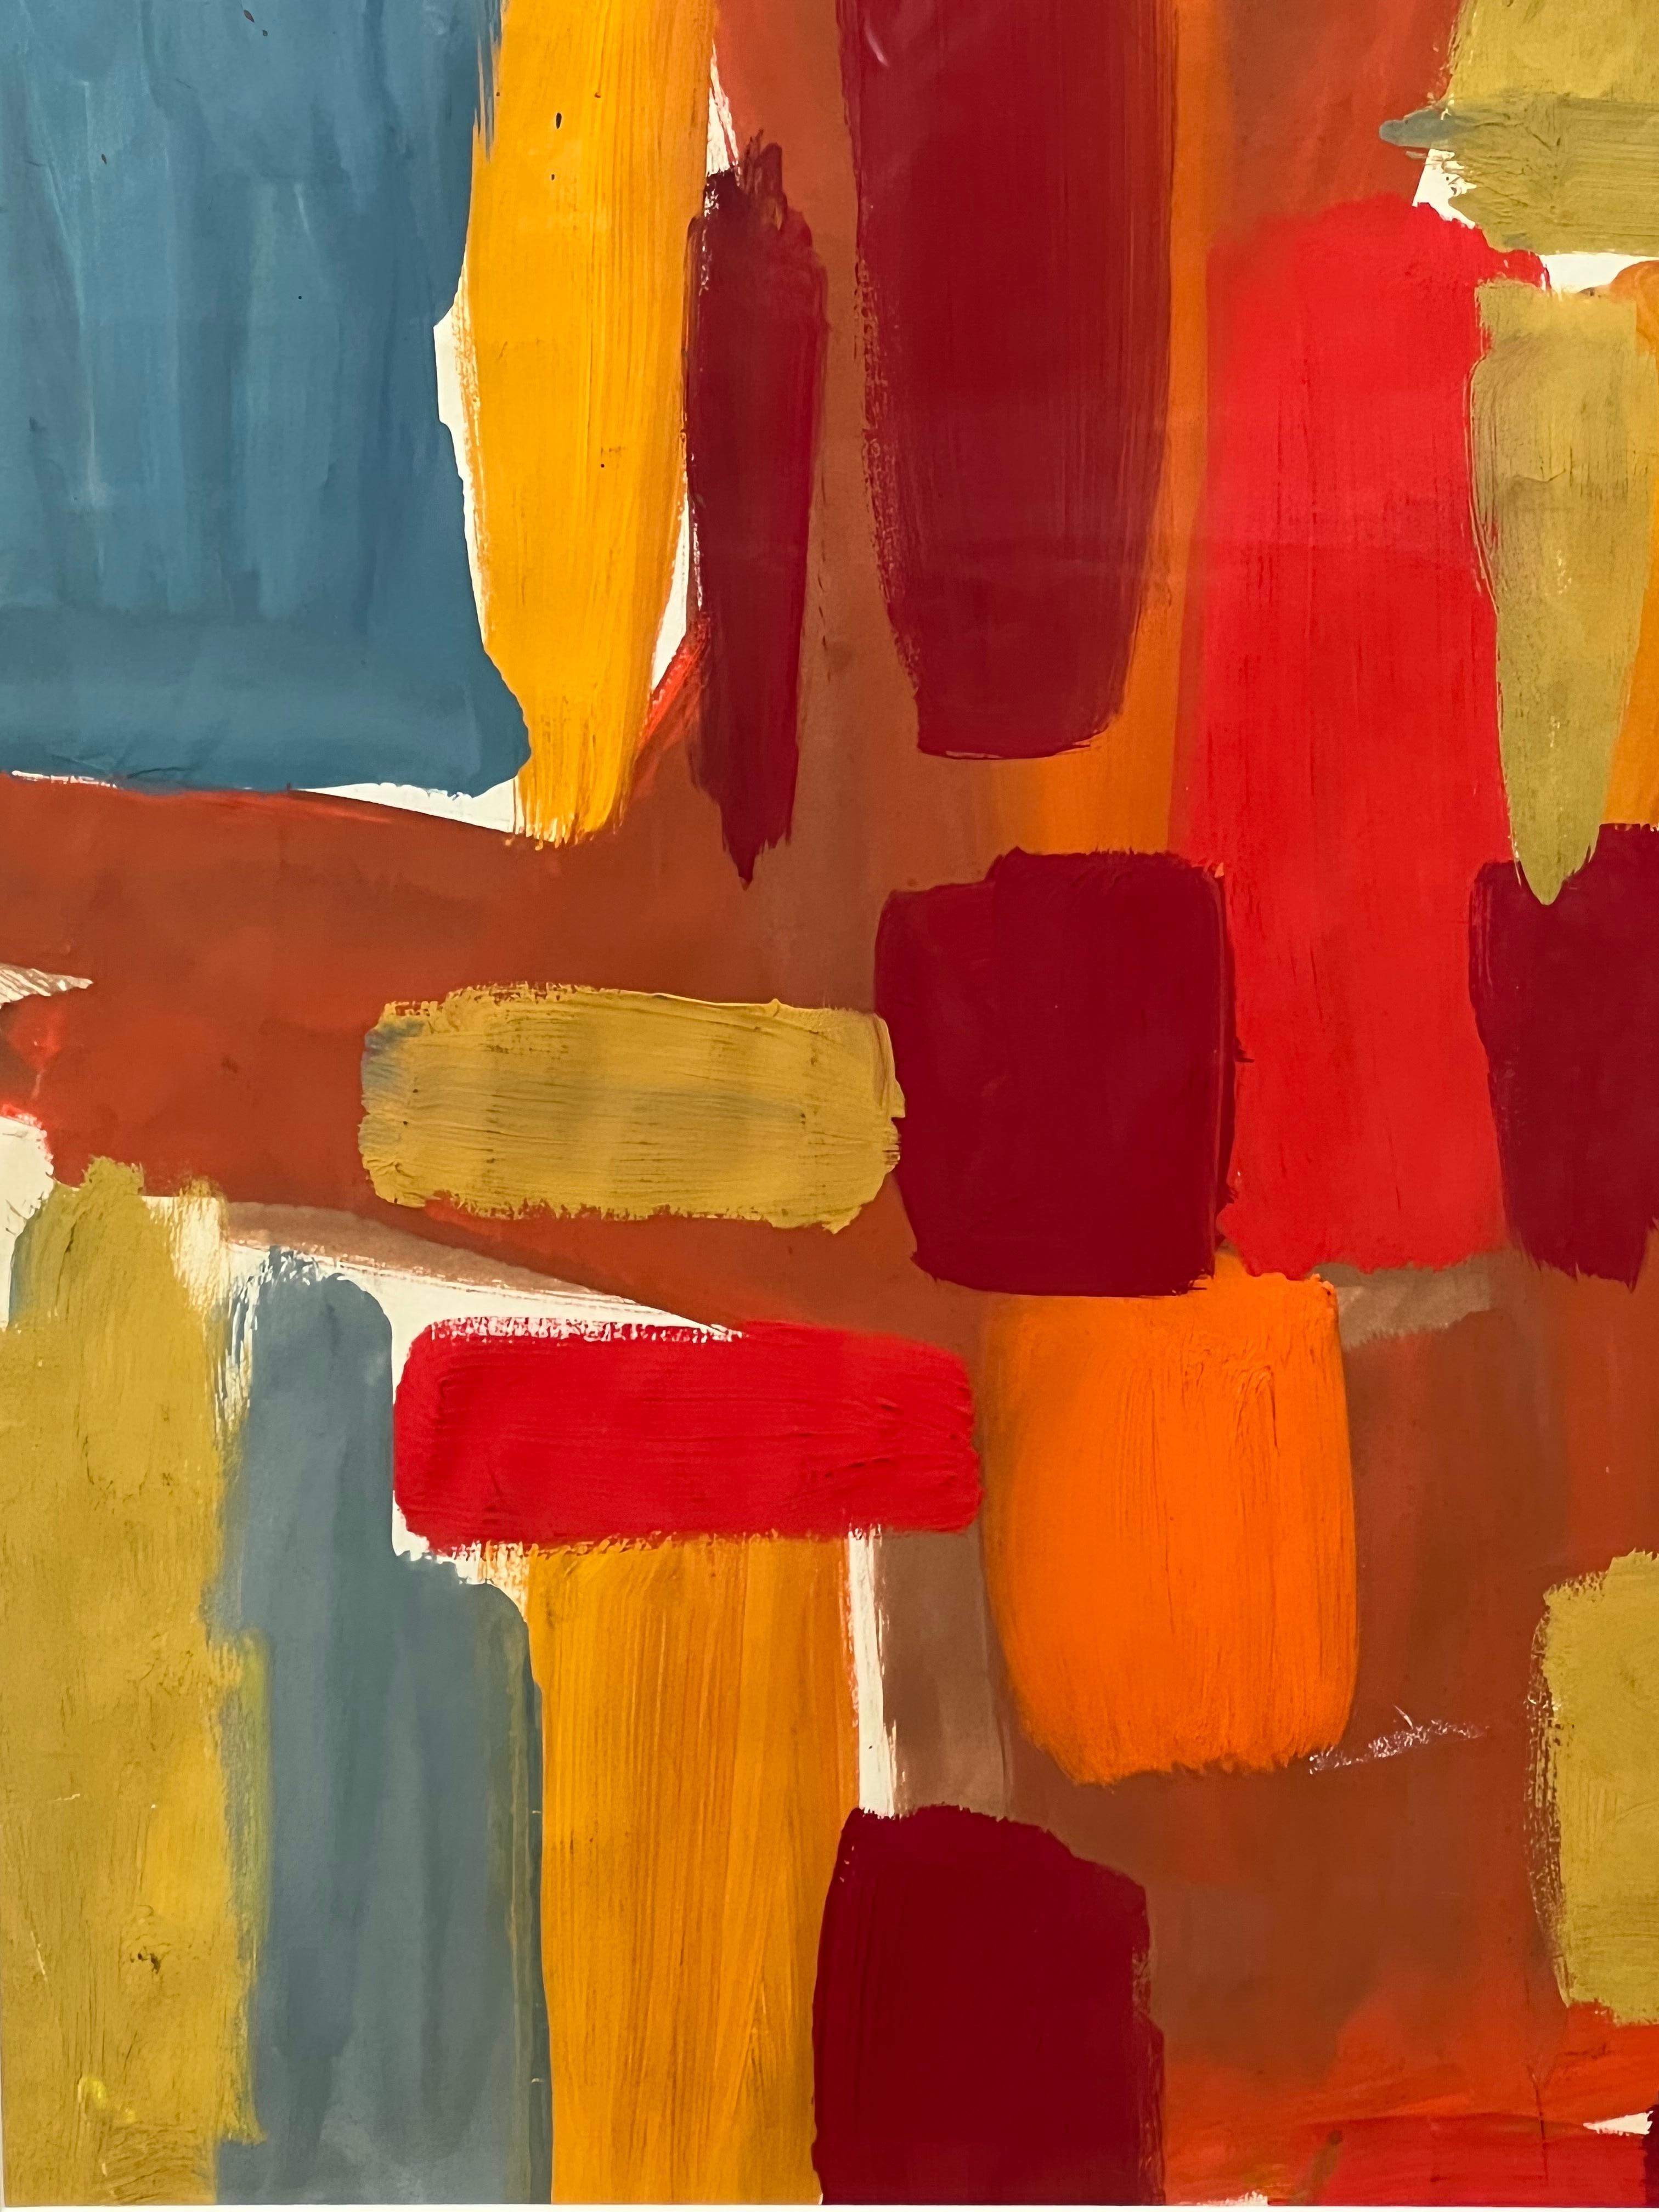 This piece by Jae Carmichael (1925-2005) features a patchwork gouache painting full of emotion and color, with broad strokes of yellow, red, green, and blue filling the artwork in horizontal and vertical directions. The overall impression of the